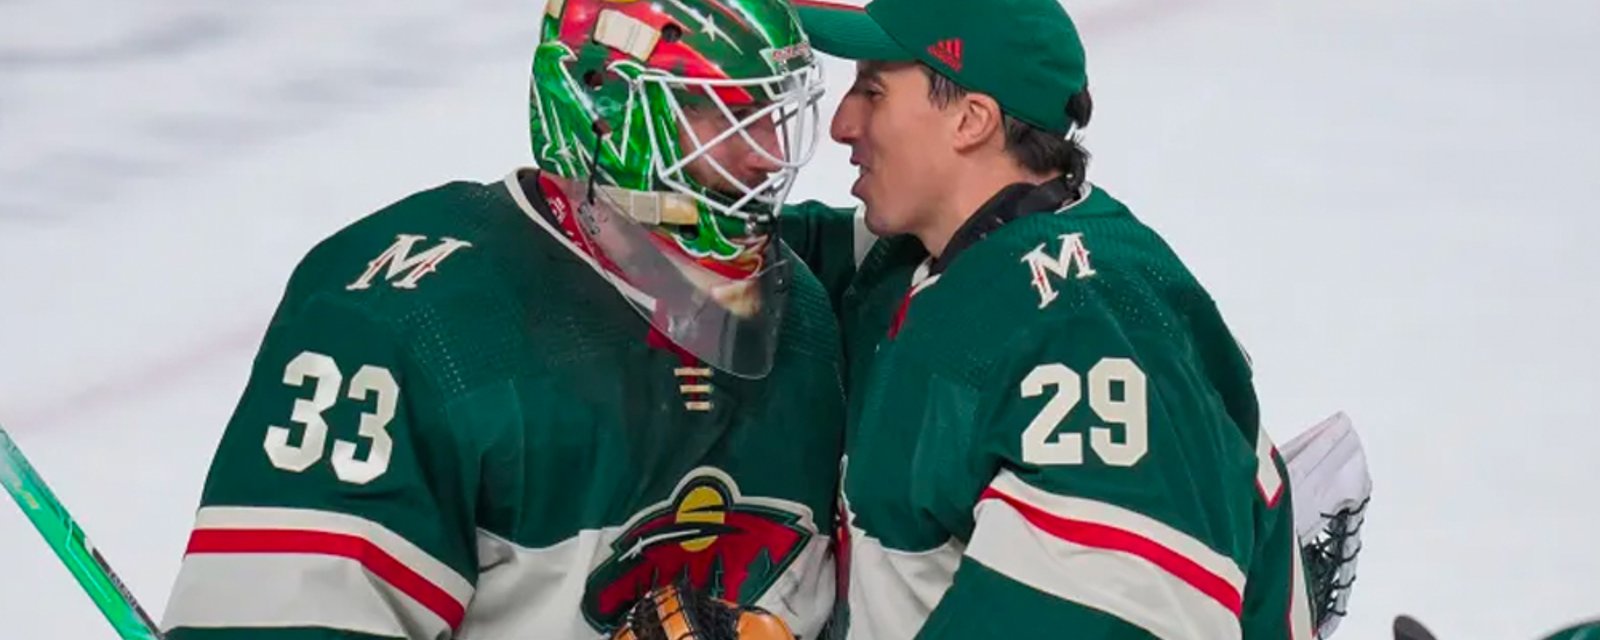 Lineup changes coming for Wild ahead of must win Game 6